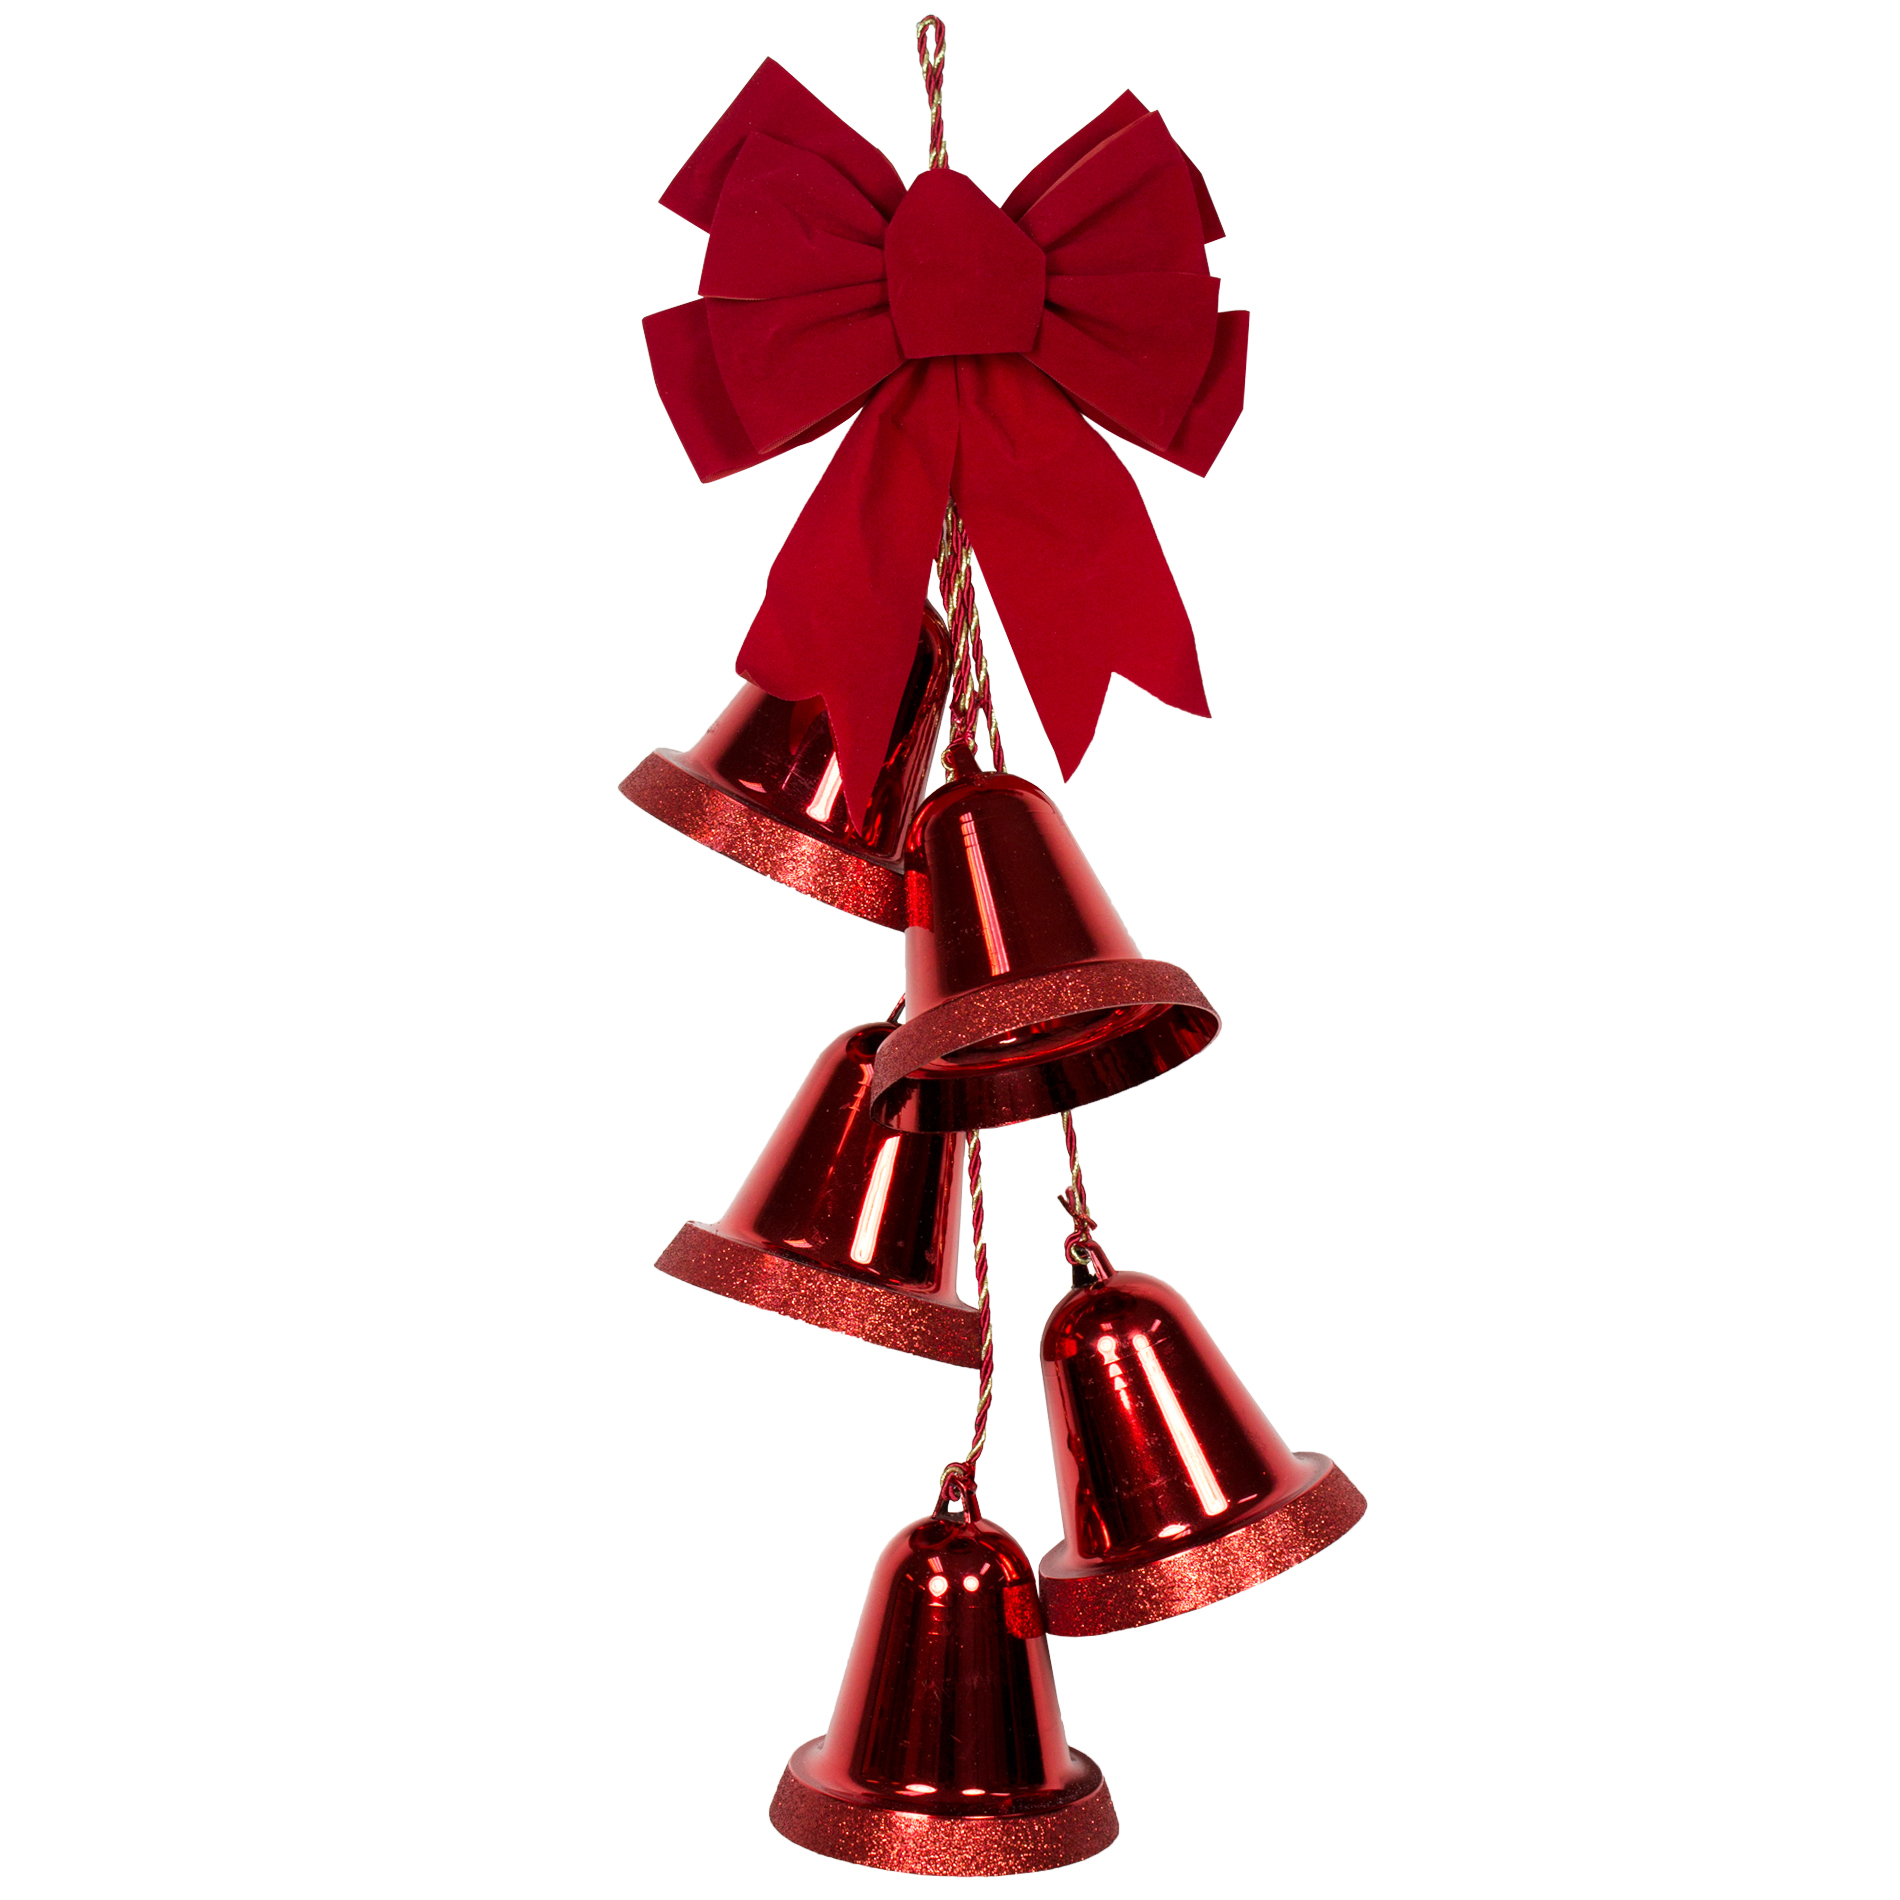 23" Set of 5" 5pc Red Bells - Shiny Bells with Flocked Bow